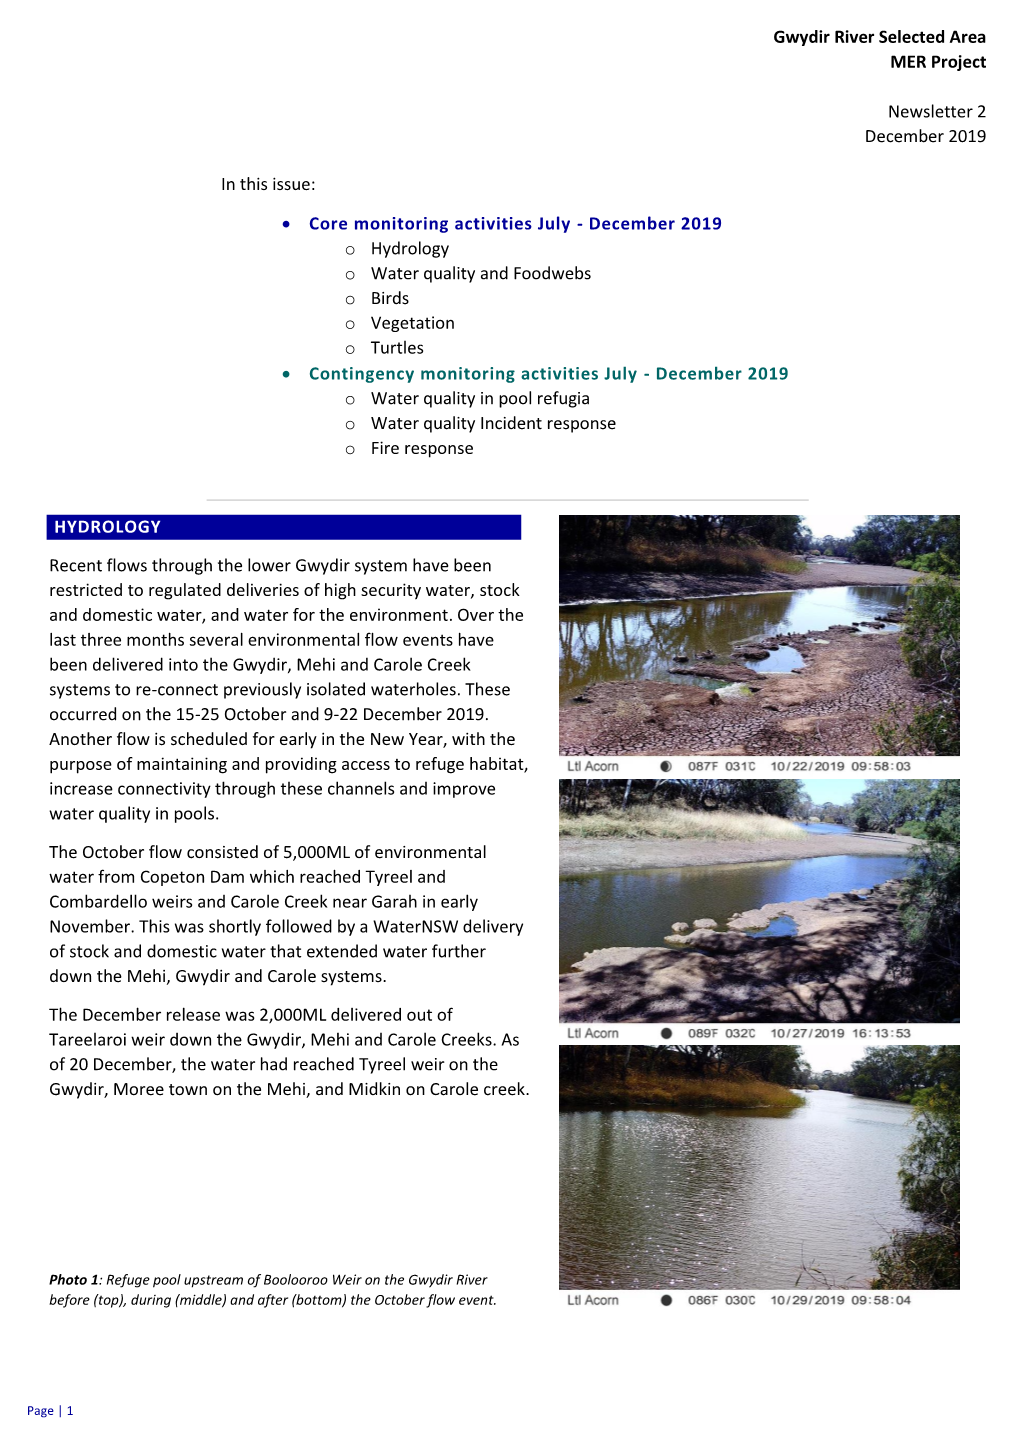 Gwydir River Selected Area MER Project Newsletter 2 December 2019